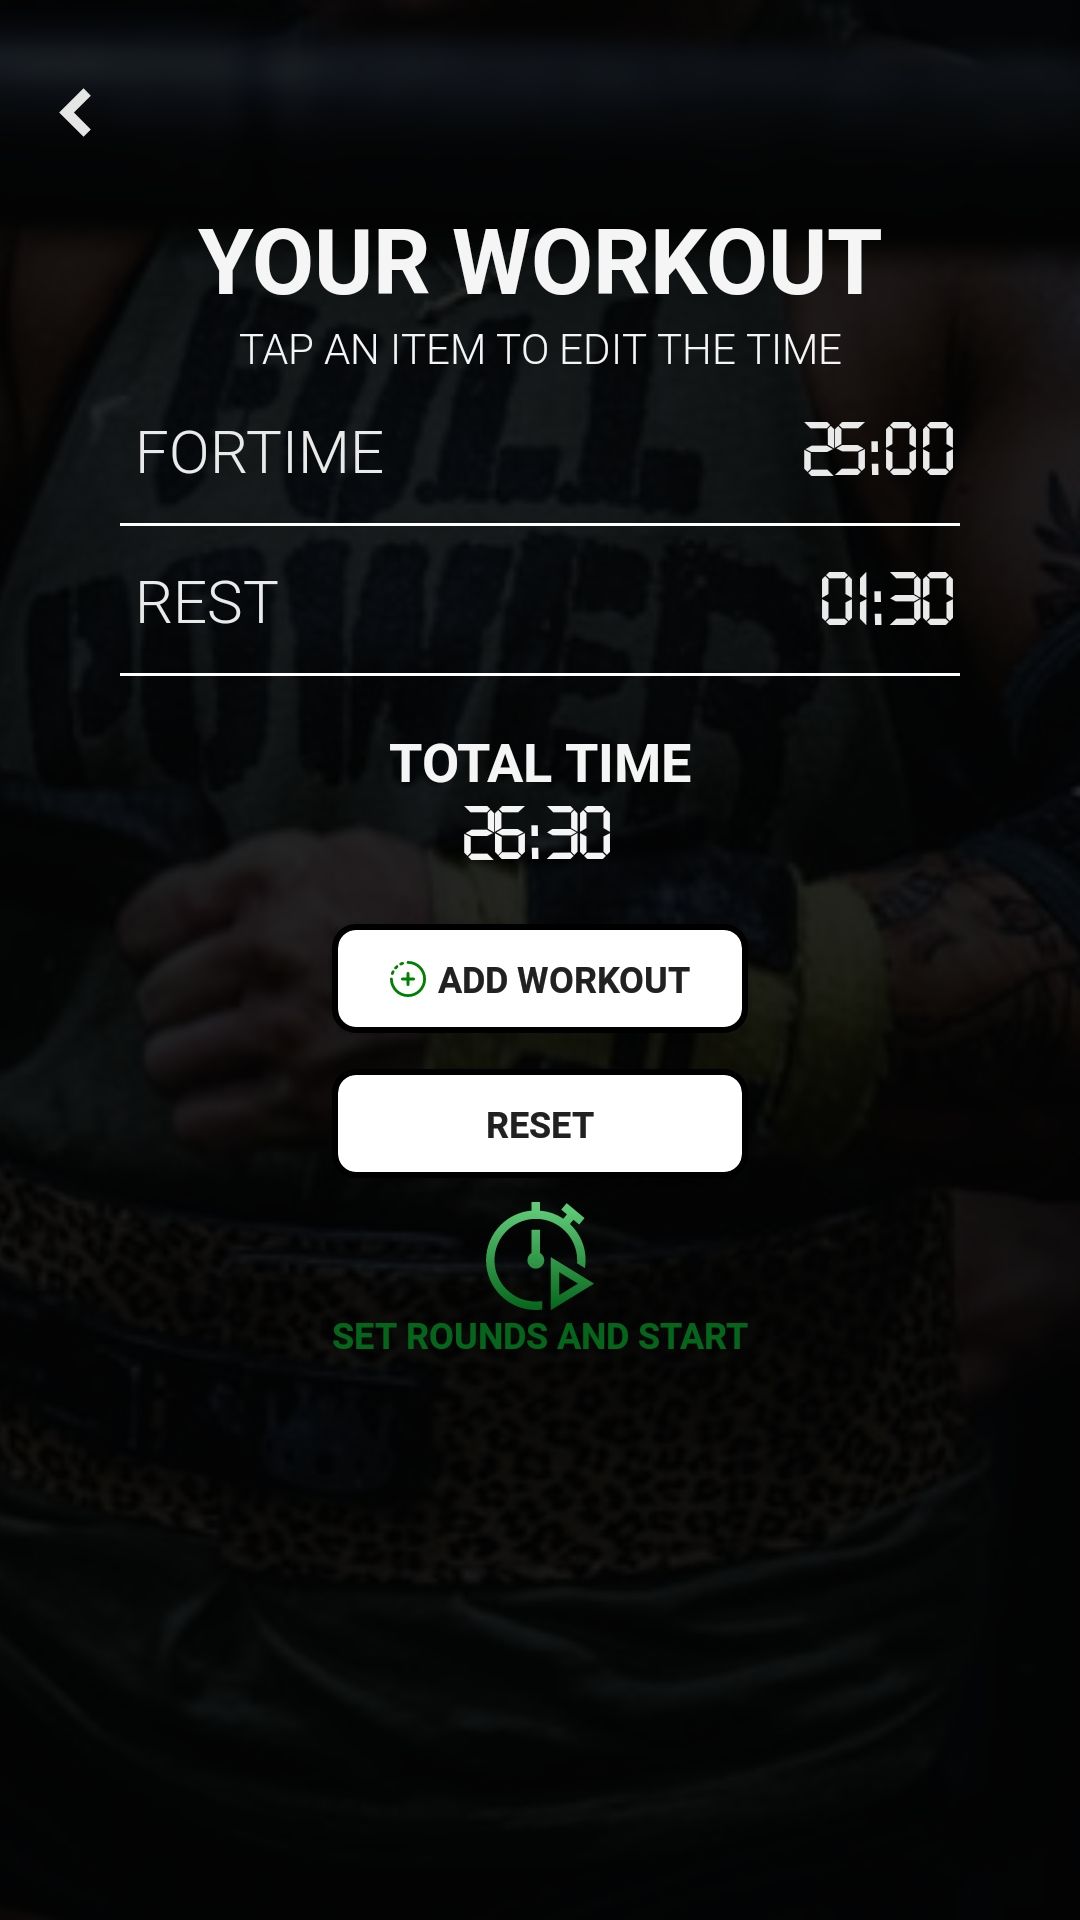 Hero Timer mobile exercise app workout